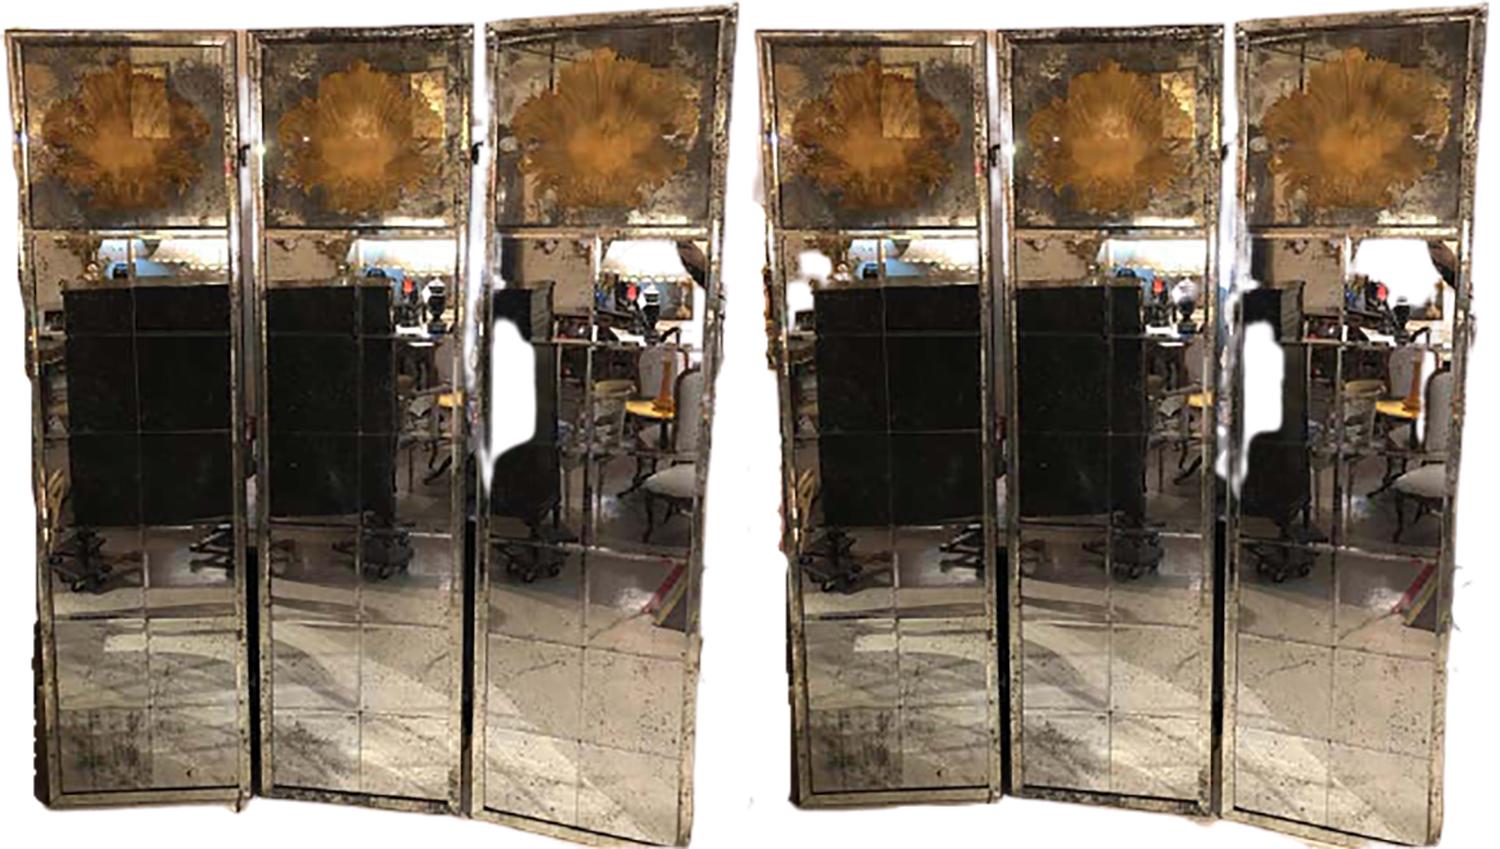 Monumental pair of Art Deco fashioned three-panel mirrored room dividers or folding screens. These simply spectacular shell carved distressed mirror panels are certain to add jaw dropping reflection to any room in the home or office. Purchased from